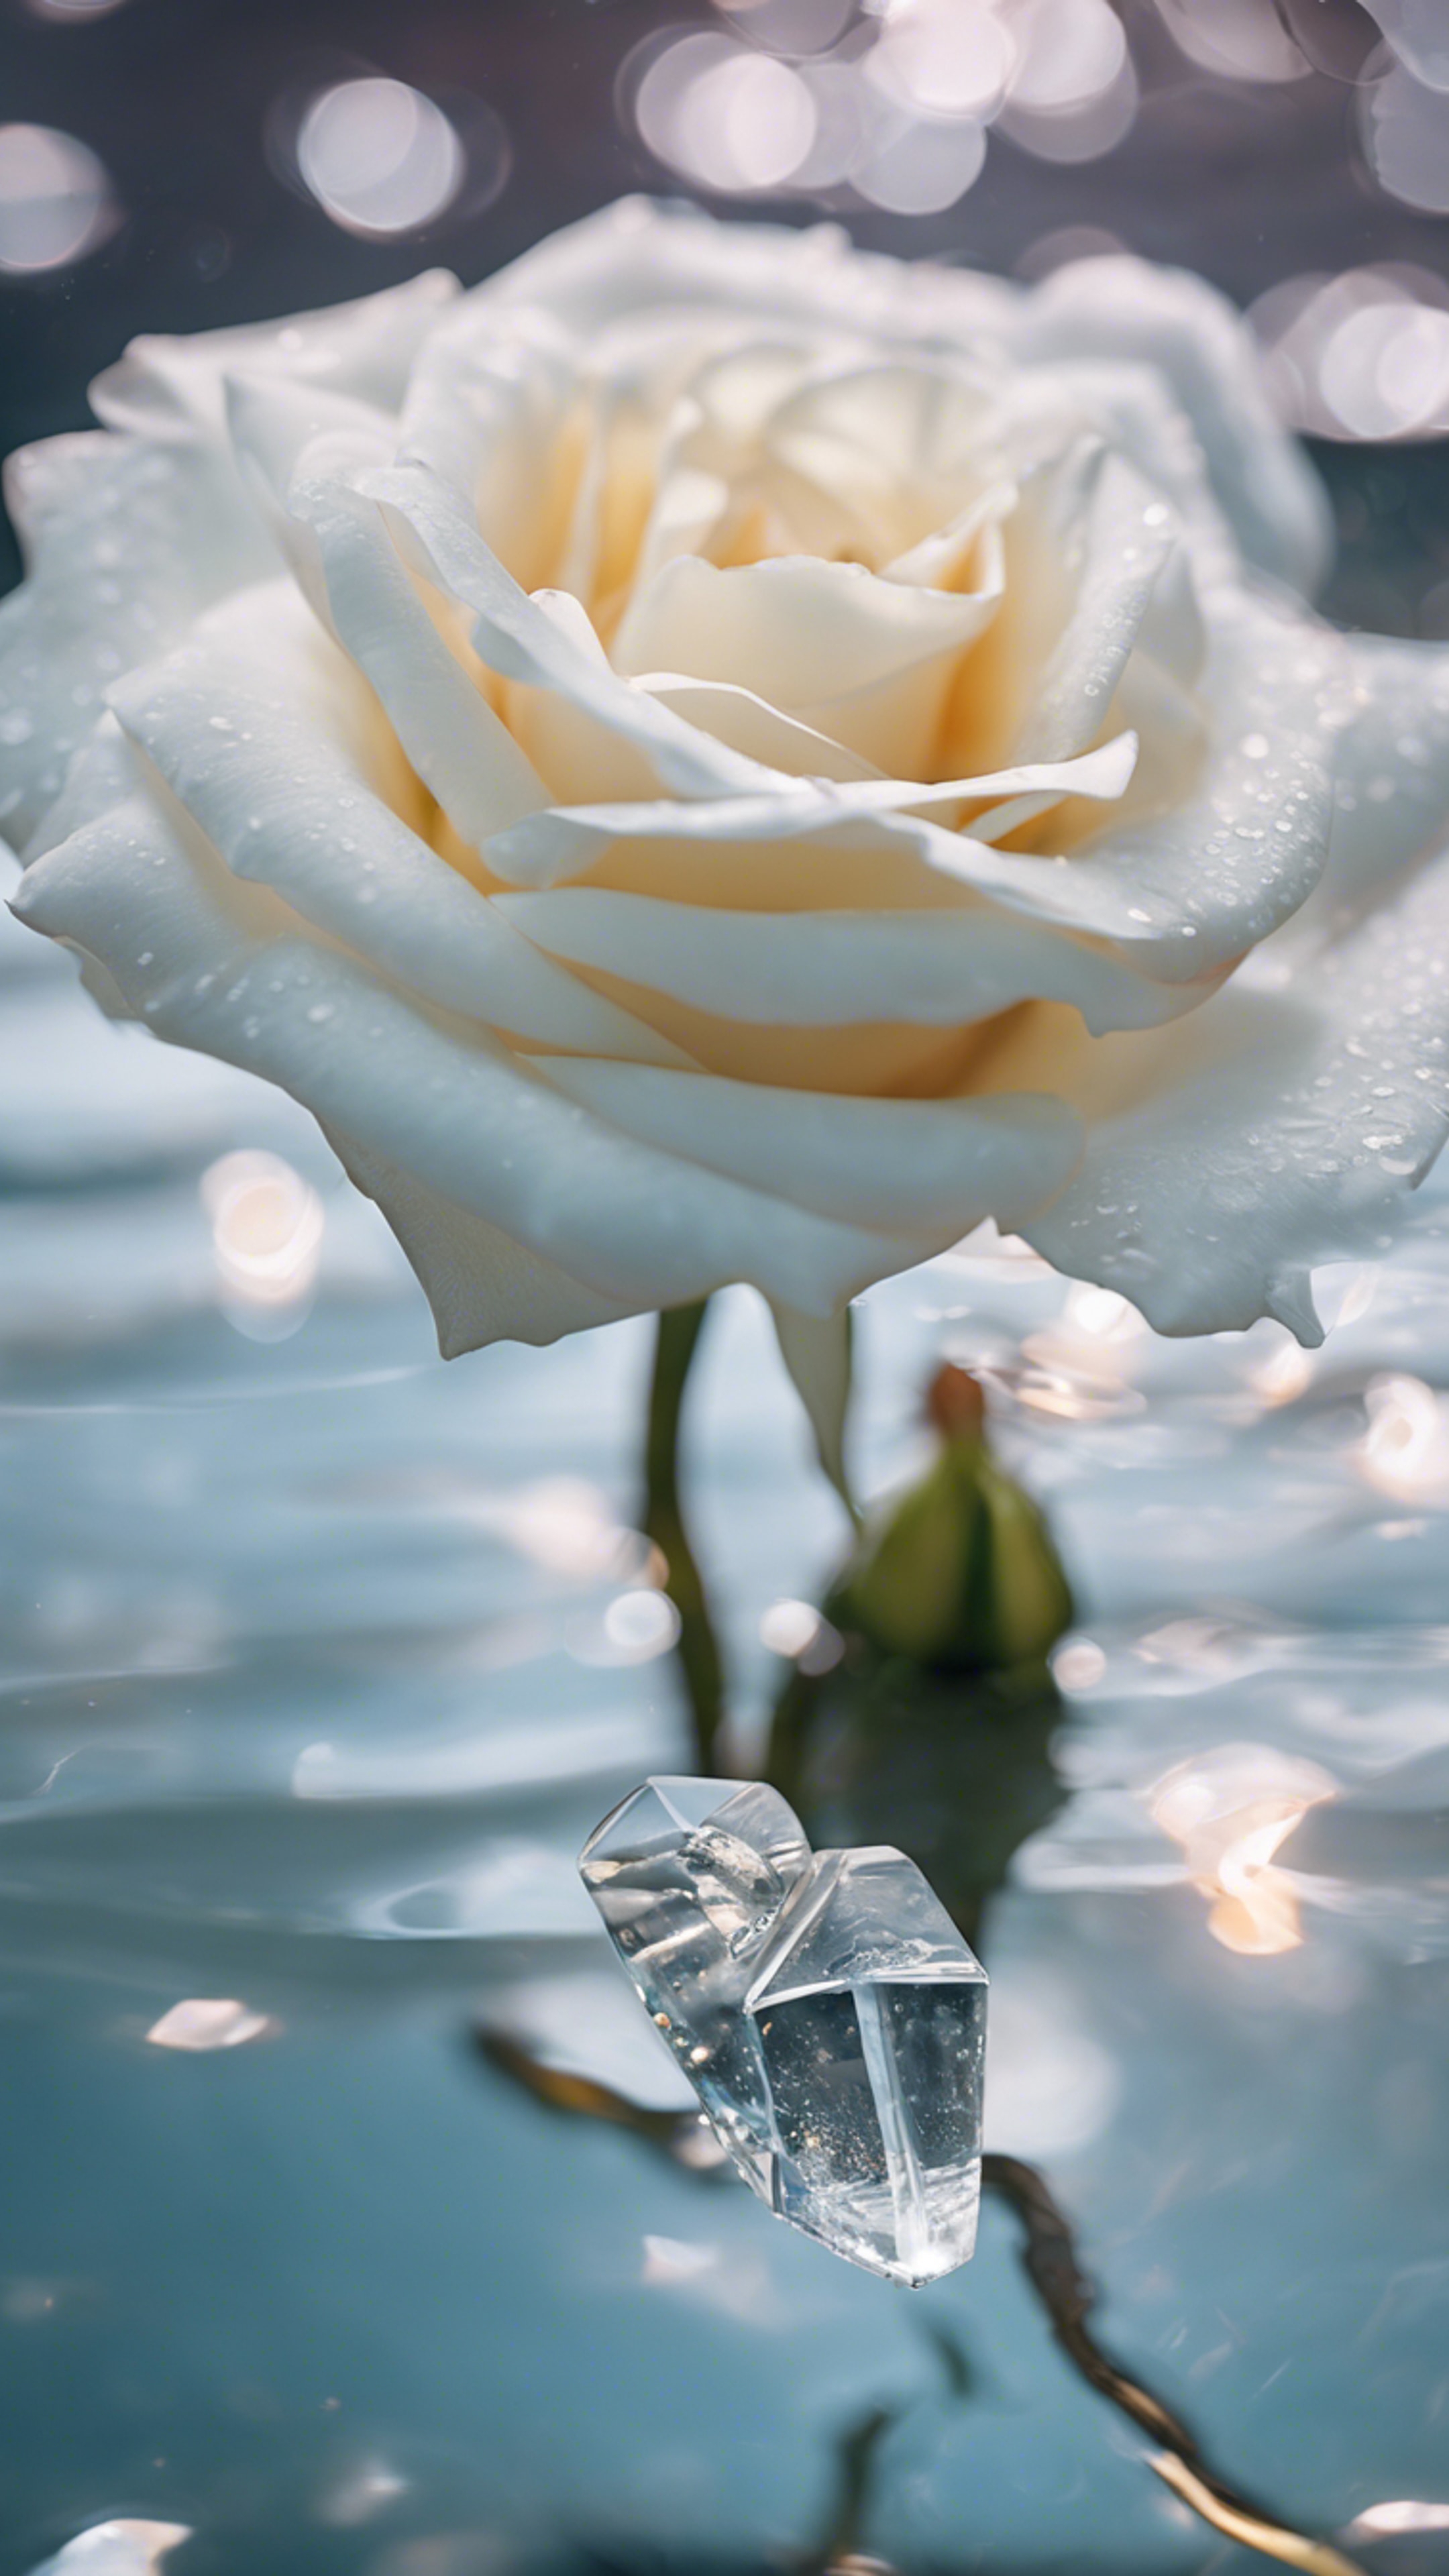 A white rose submerged in clear crystal water, petals gracefully spreading. Sfondo[af81d3e8e21443b29805]